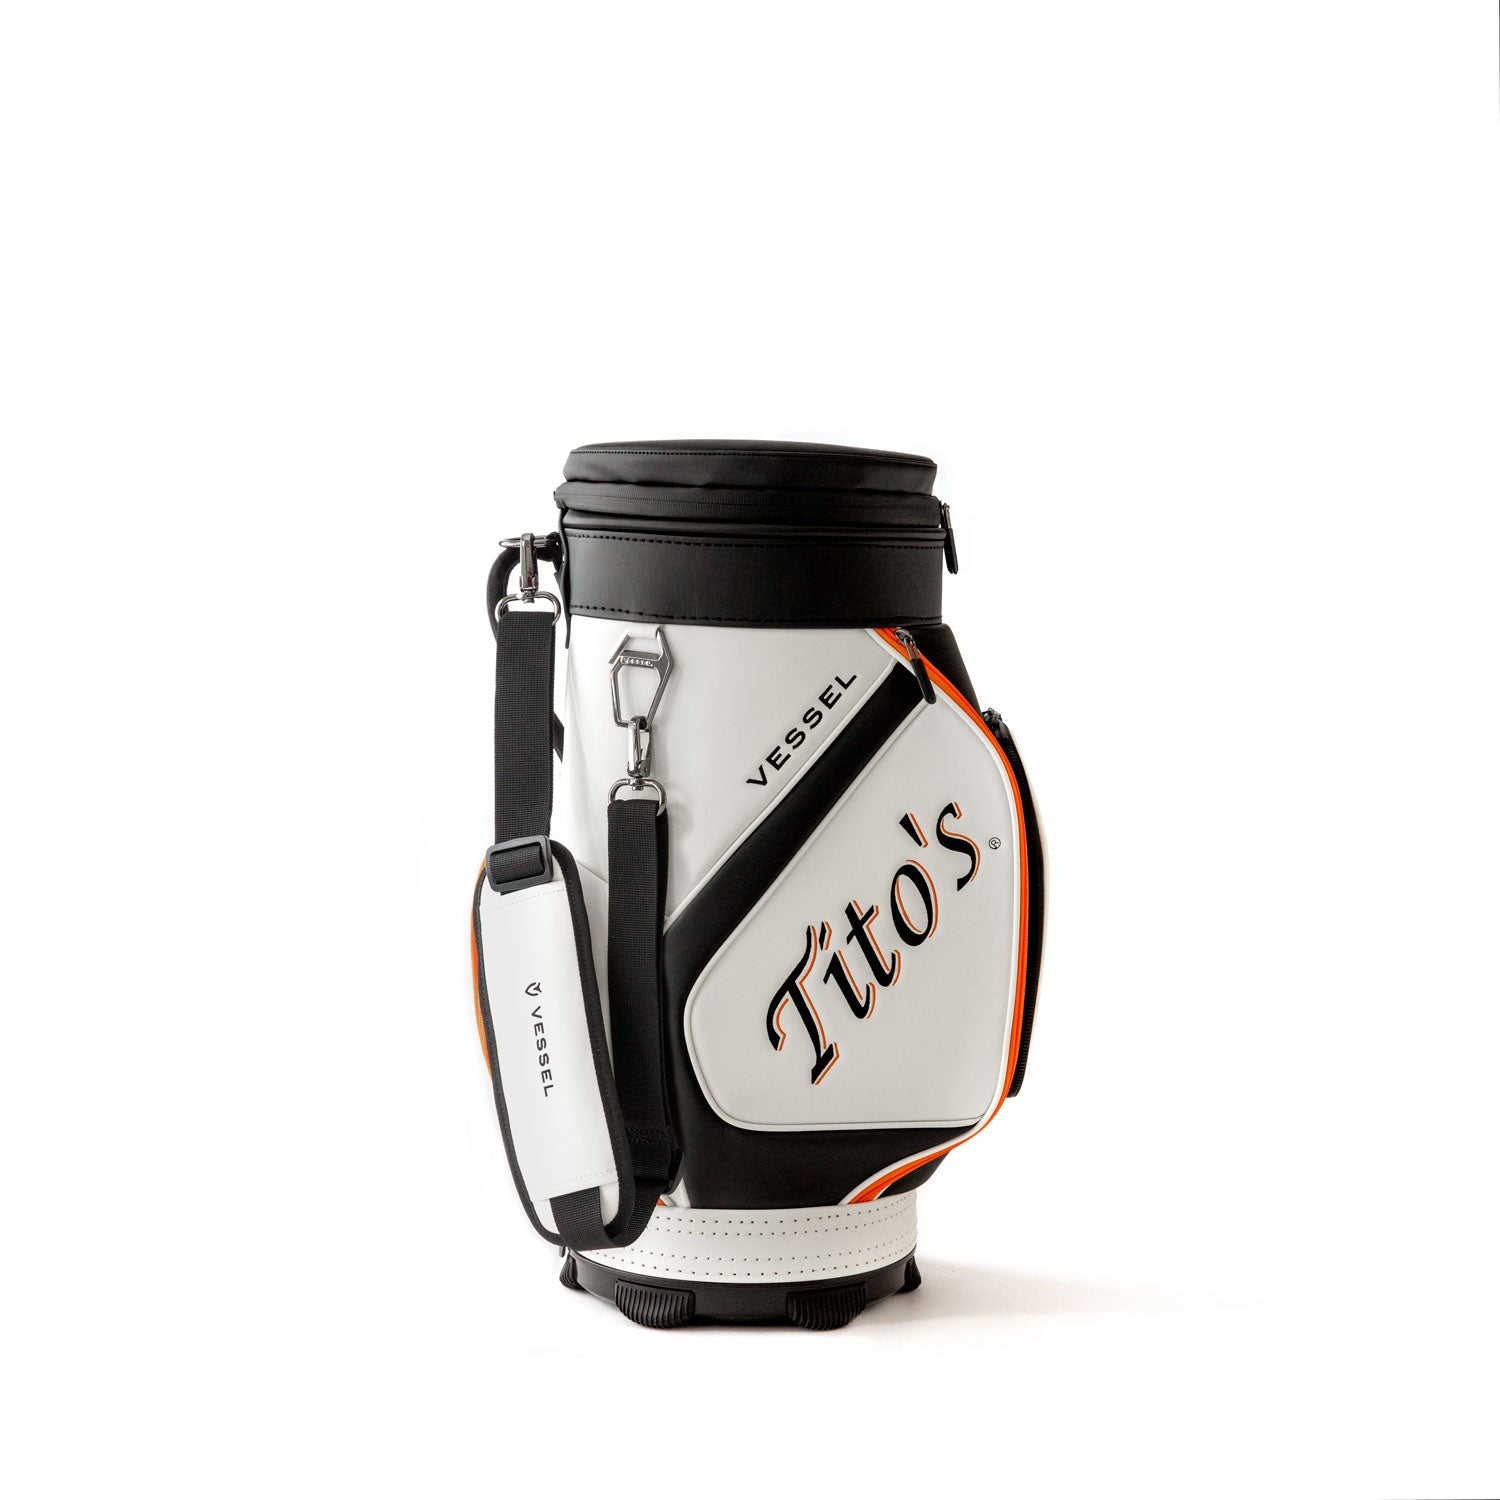 Side view of orange, black, and white VESSEL Cool Caddy with Tito's and VESSEL wordmark and padded shoulder strap